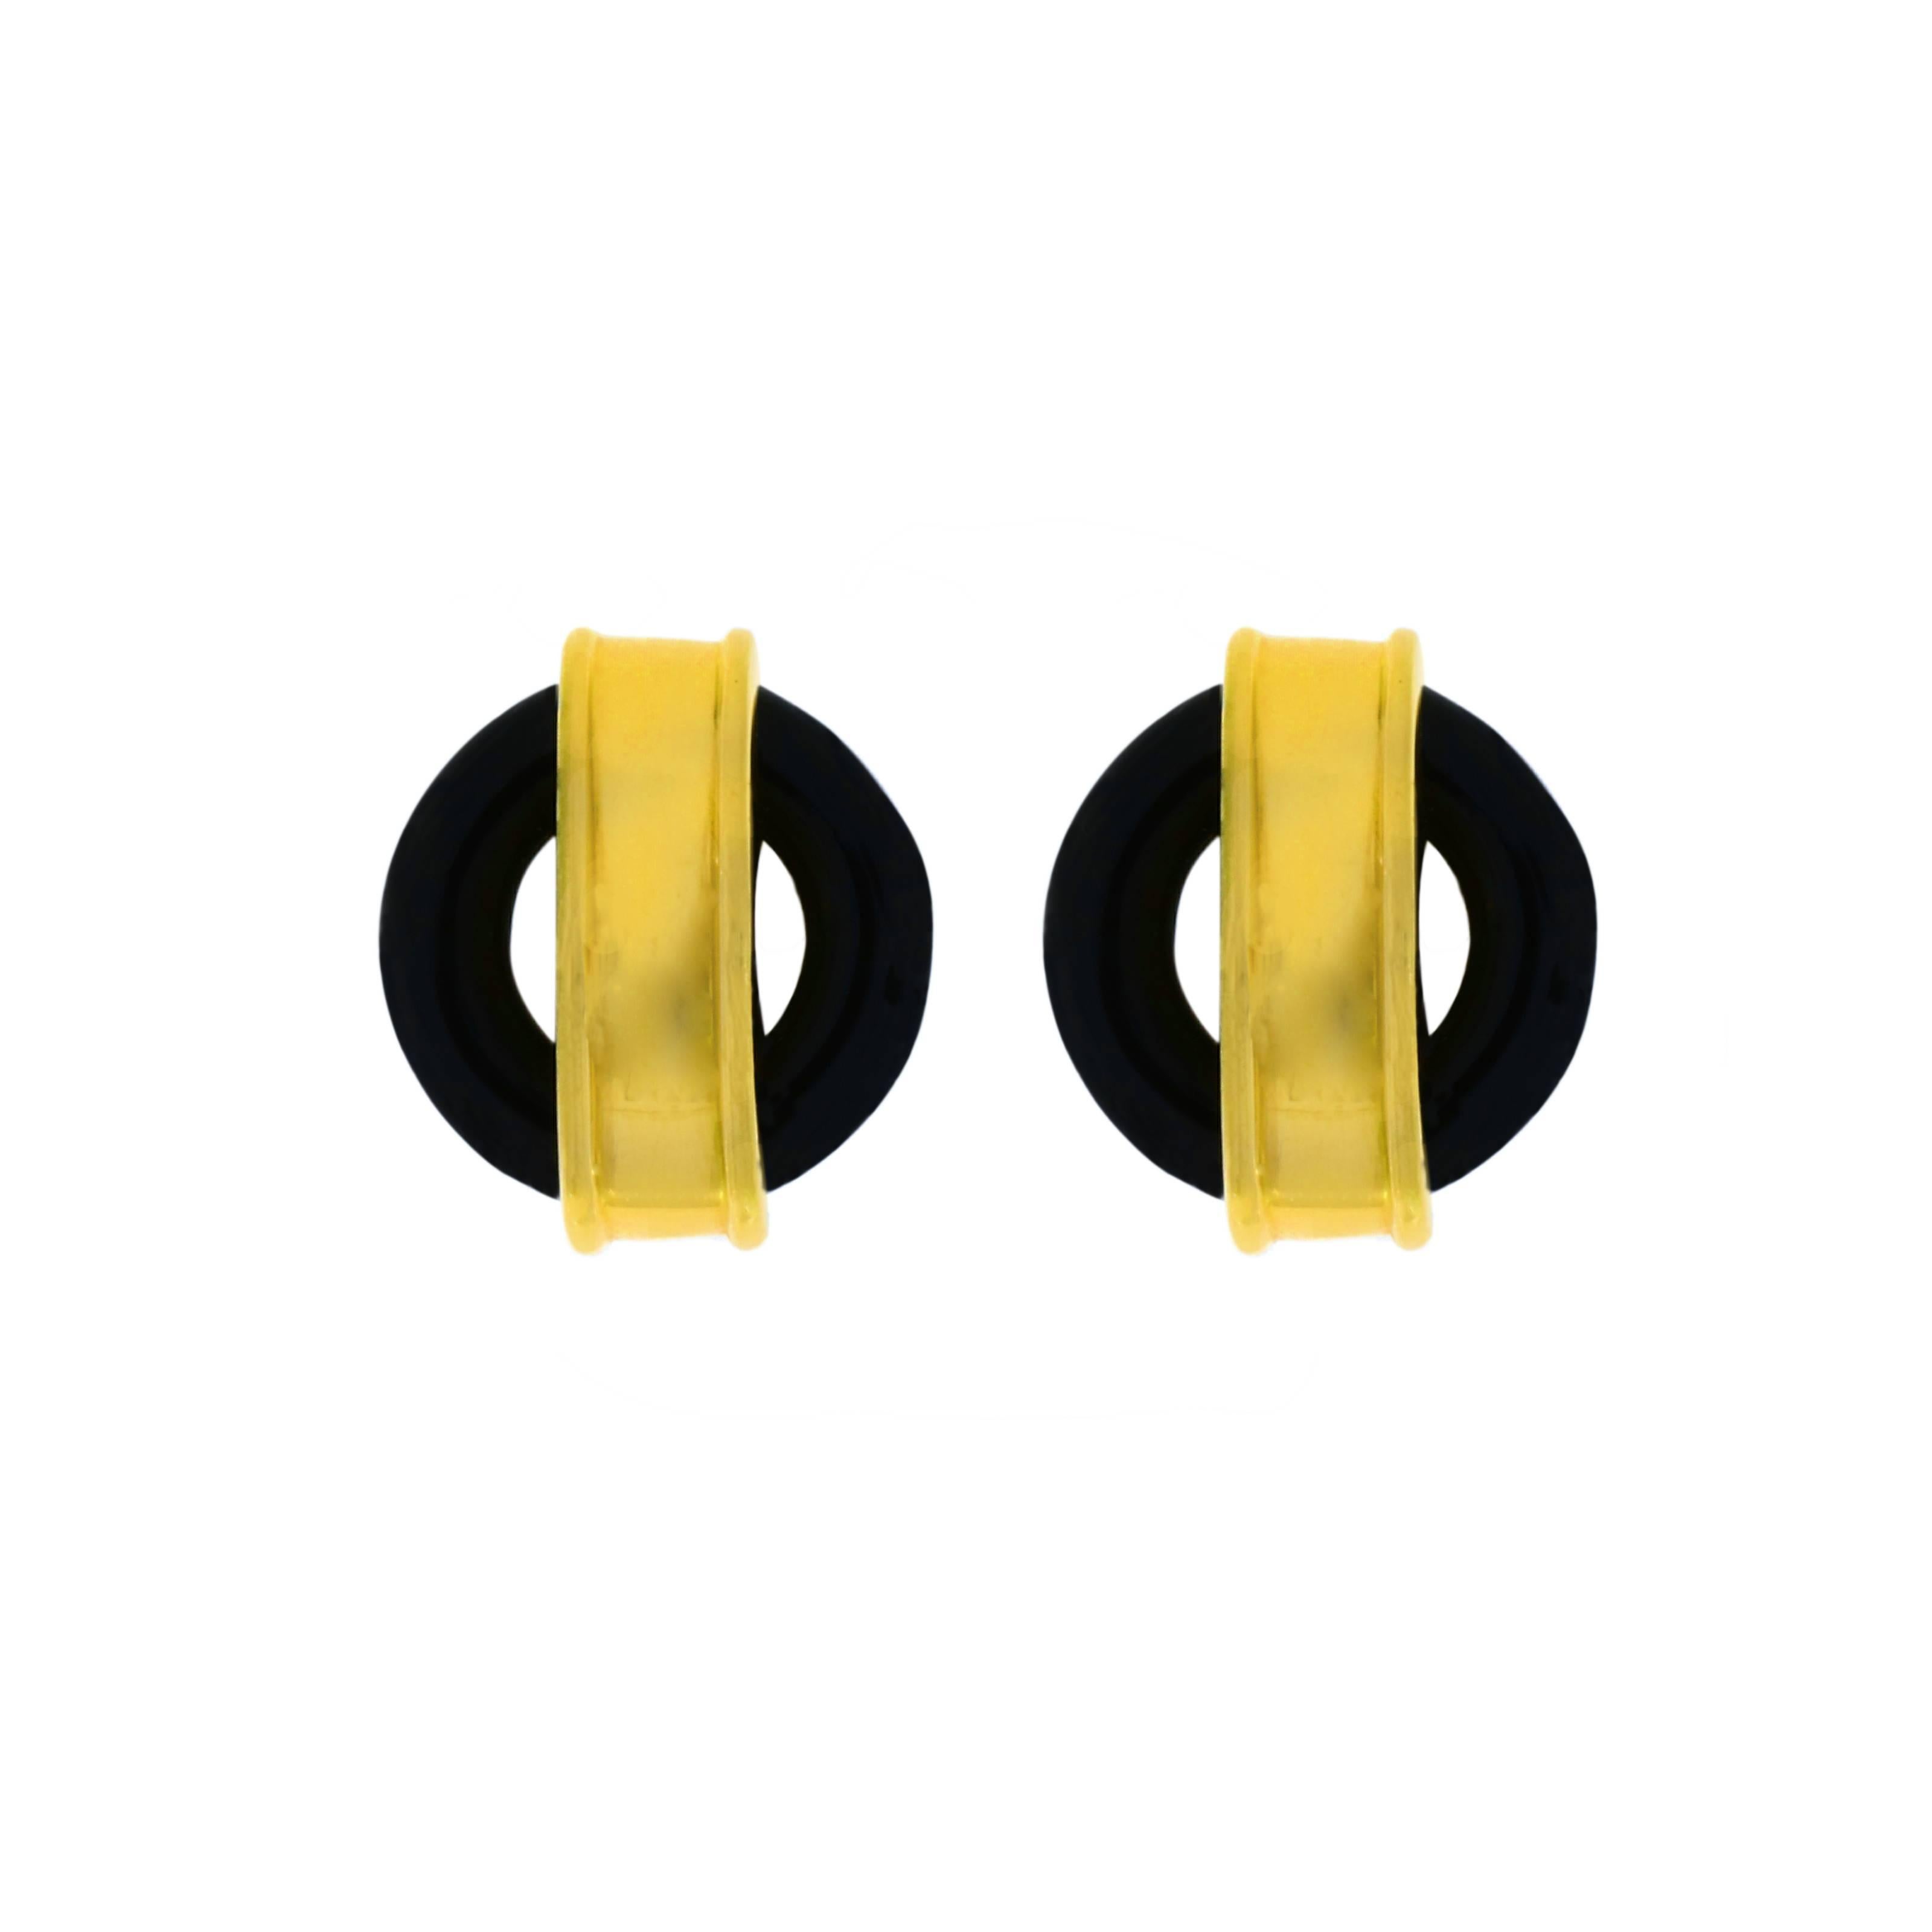 Modernist Circa 1970 Pair of 18 Karat Gold Onyx  Earrings Cartier by Aldo Cipullo For Sale